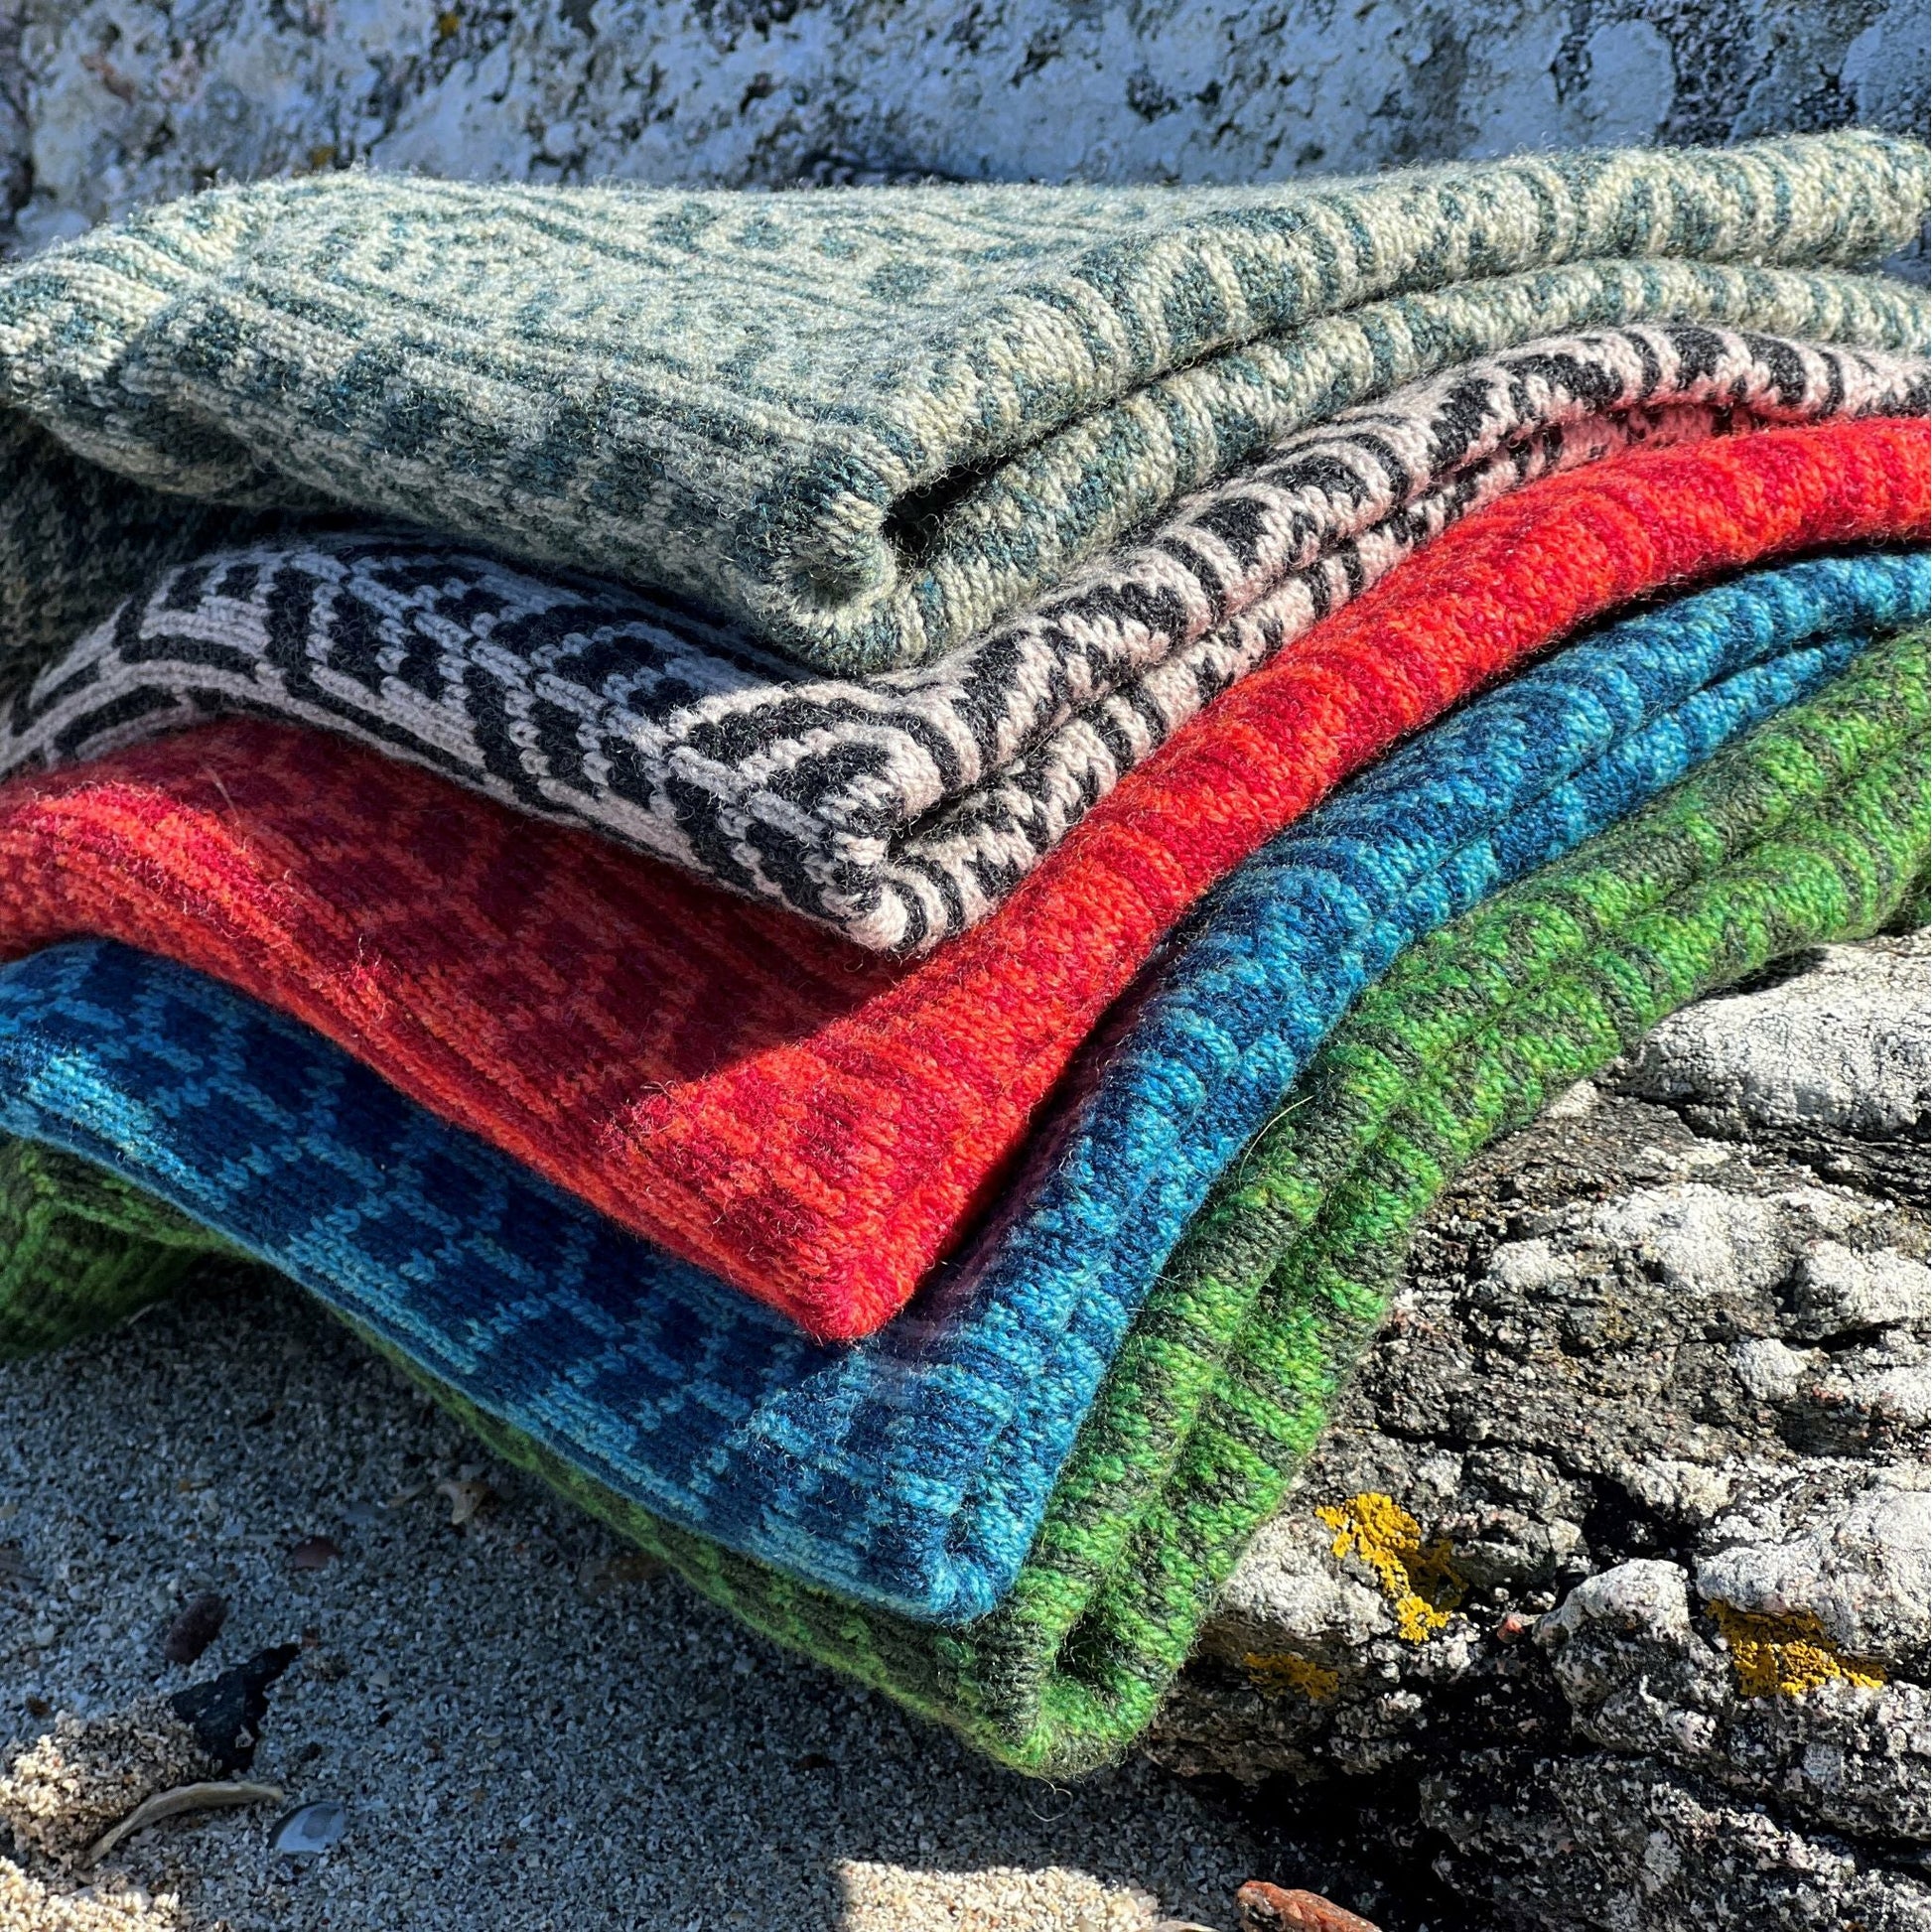 Our scarves and neck warmers are all knitted using a punch-card system on a manual vintage knitting machine and made from pure Merino lamb's wool, with bespoke two-colour fair isle patterns unique to Hebridean Journey. 